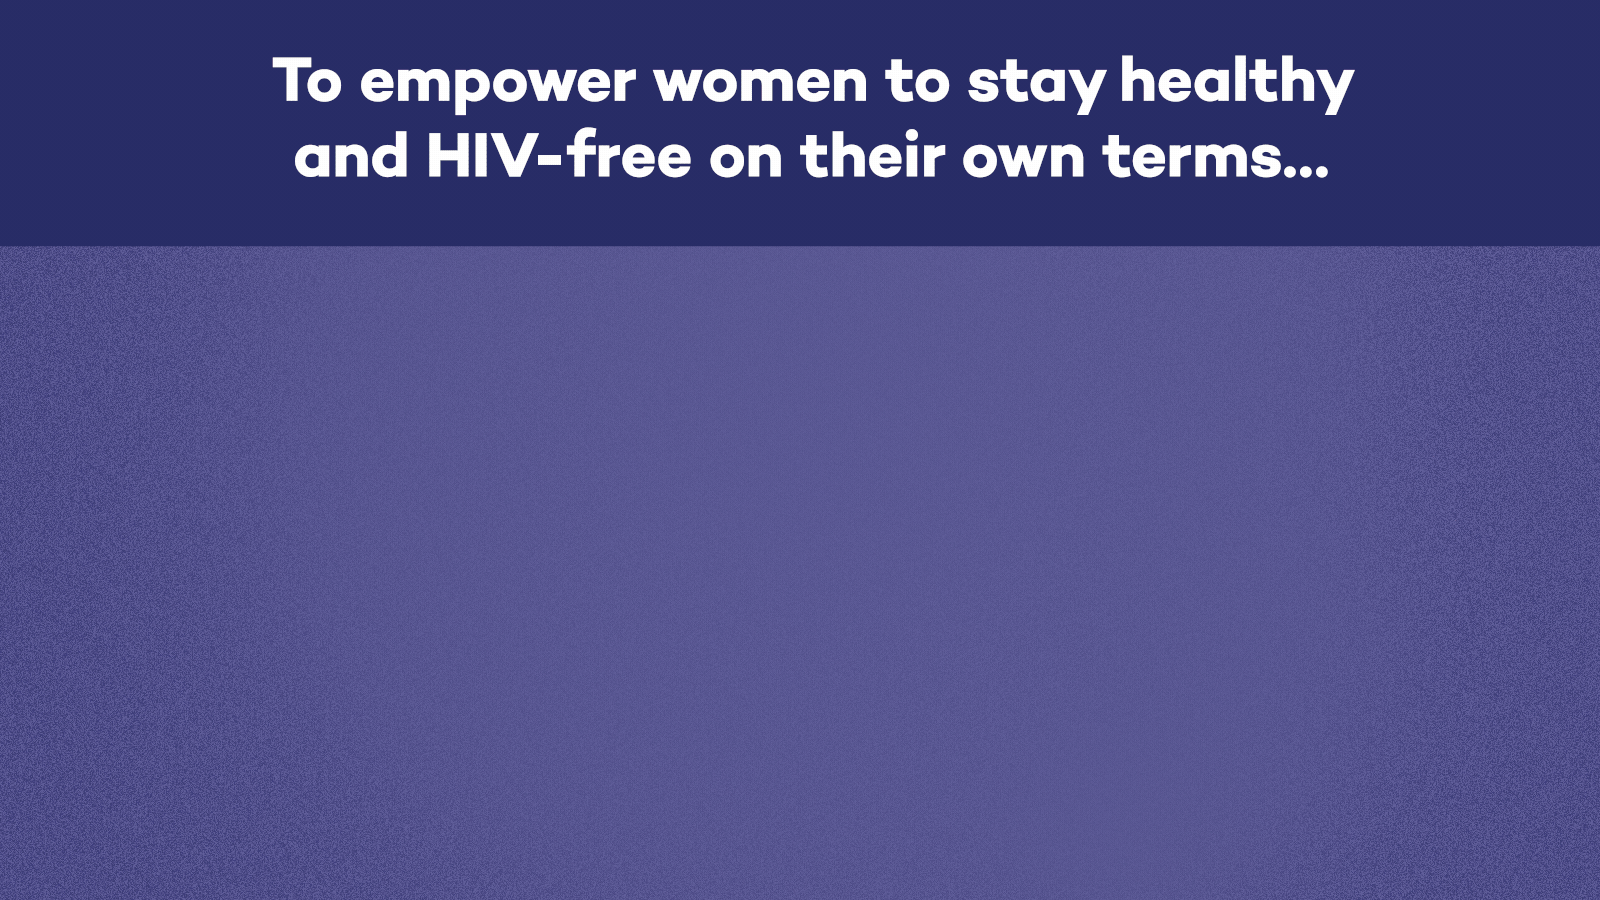 IPM on #IWD2020: To empower women to stay healthy and HIV-free on their own terms, we ALL have a part to play.